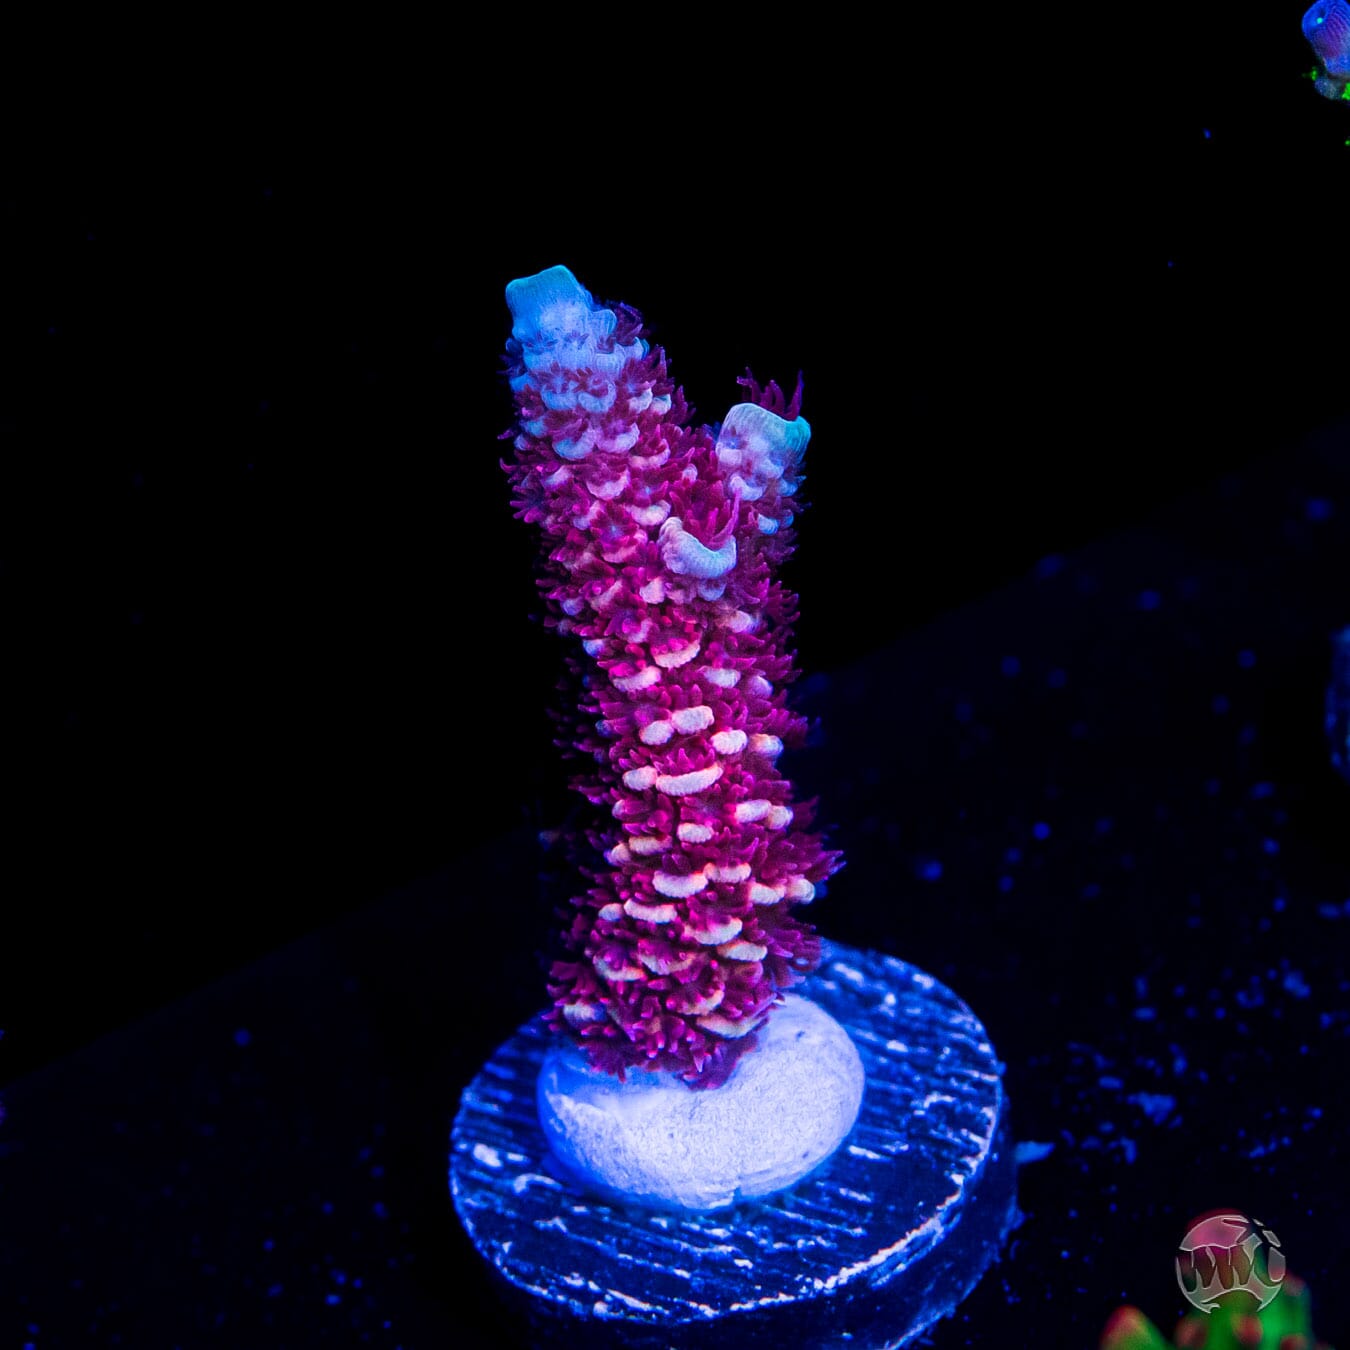 WWC Ice Queen Mille Acropora - Daylight Photo